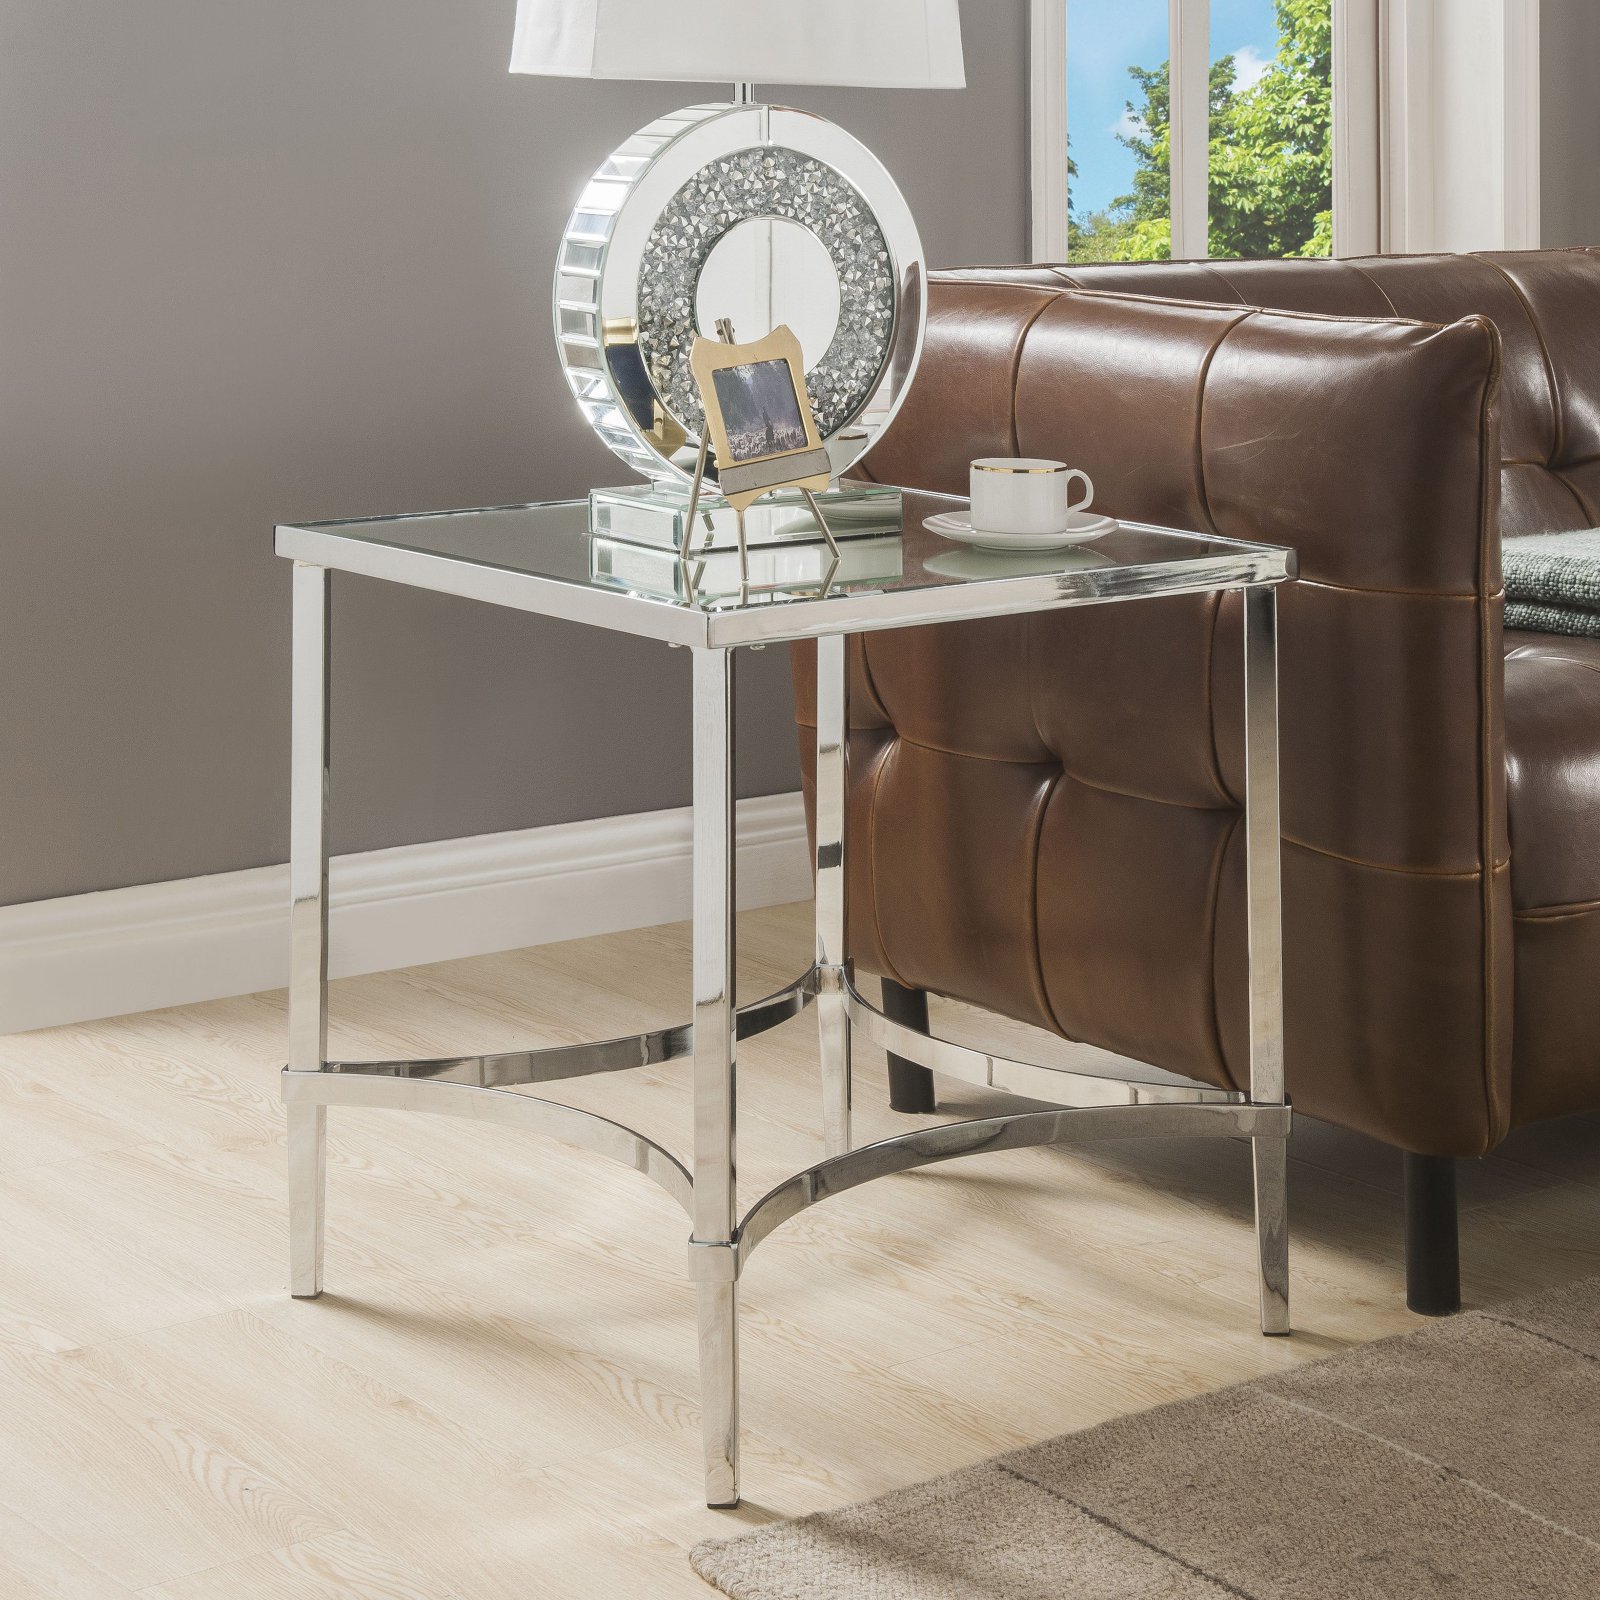 ACME 80192 Petunia End Table - Chrome & Mirror - 24 x 22 x 22 in. - image 4 of 4